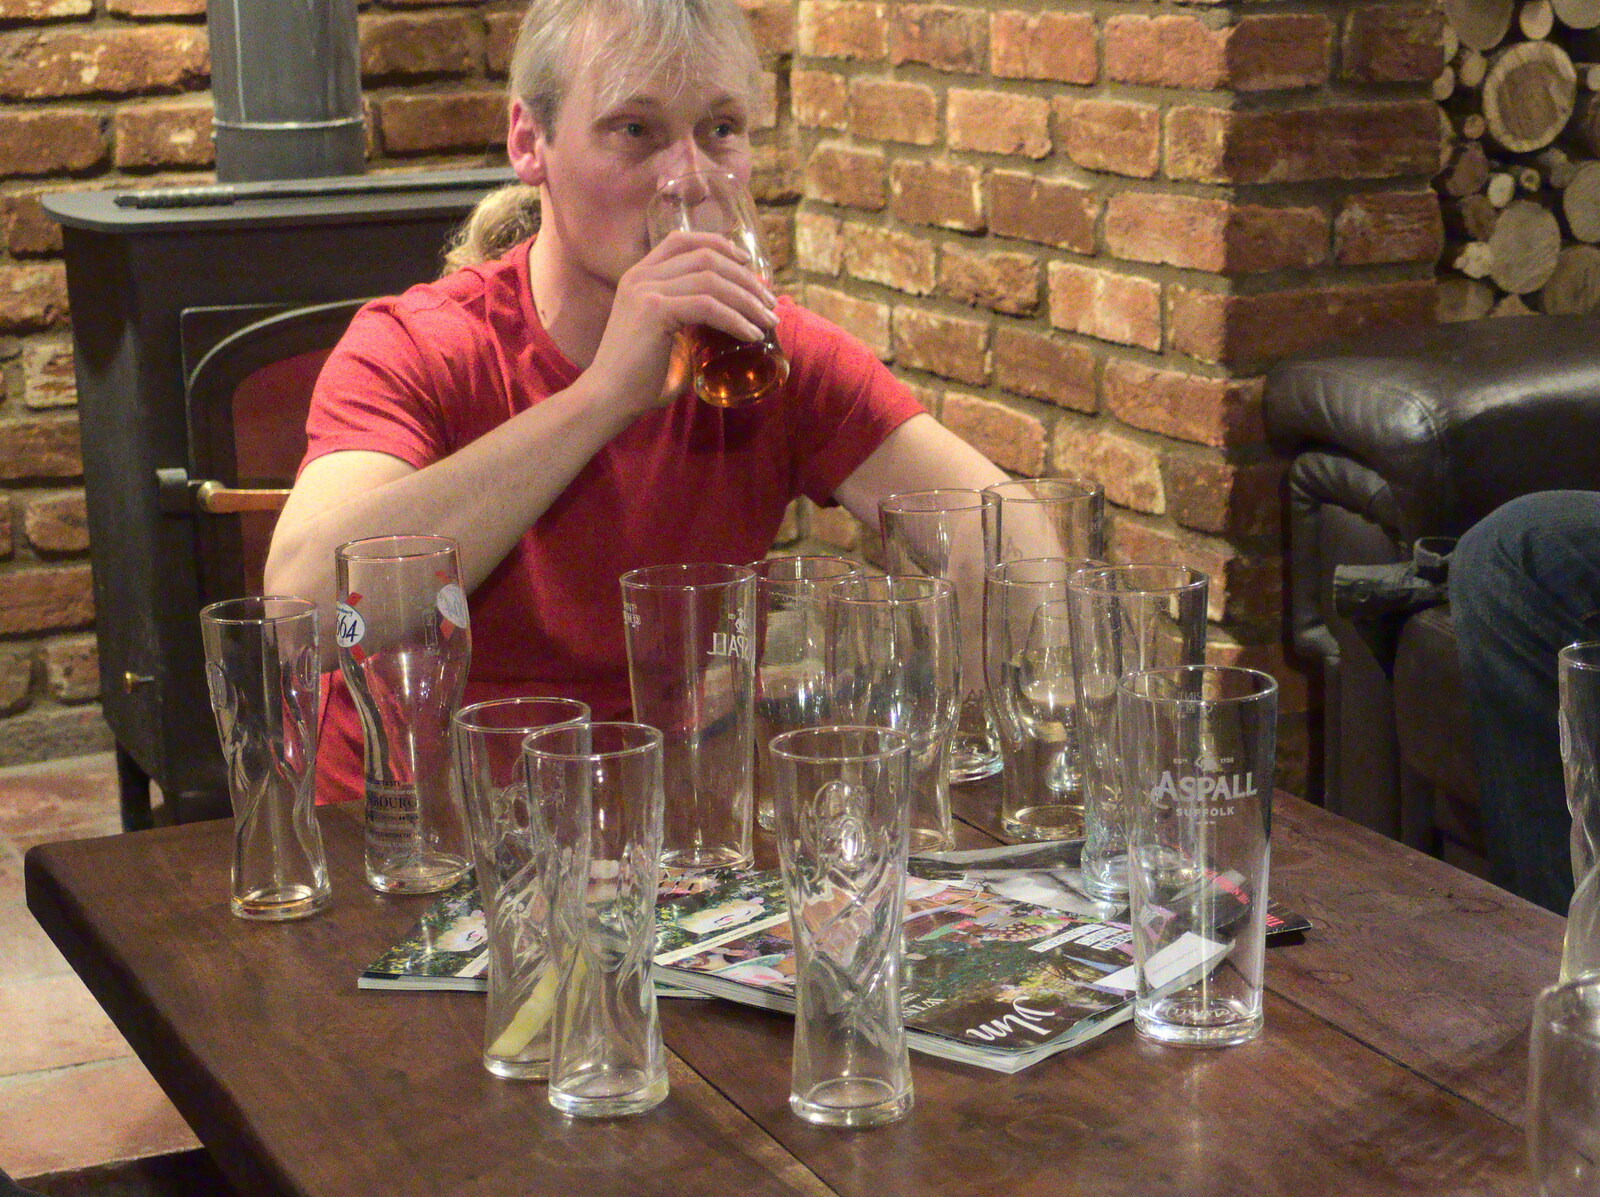 Jimmy and an impressive stash of glasses from The Last Day of Pre-School and Beer at the Trowel and Hammer, Cotton, Suffolk - 29th March 2015